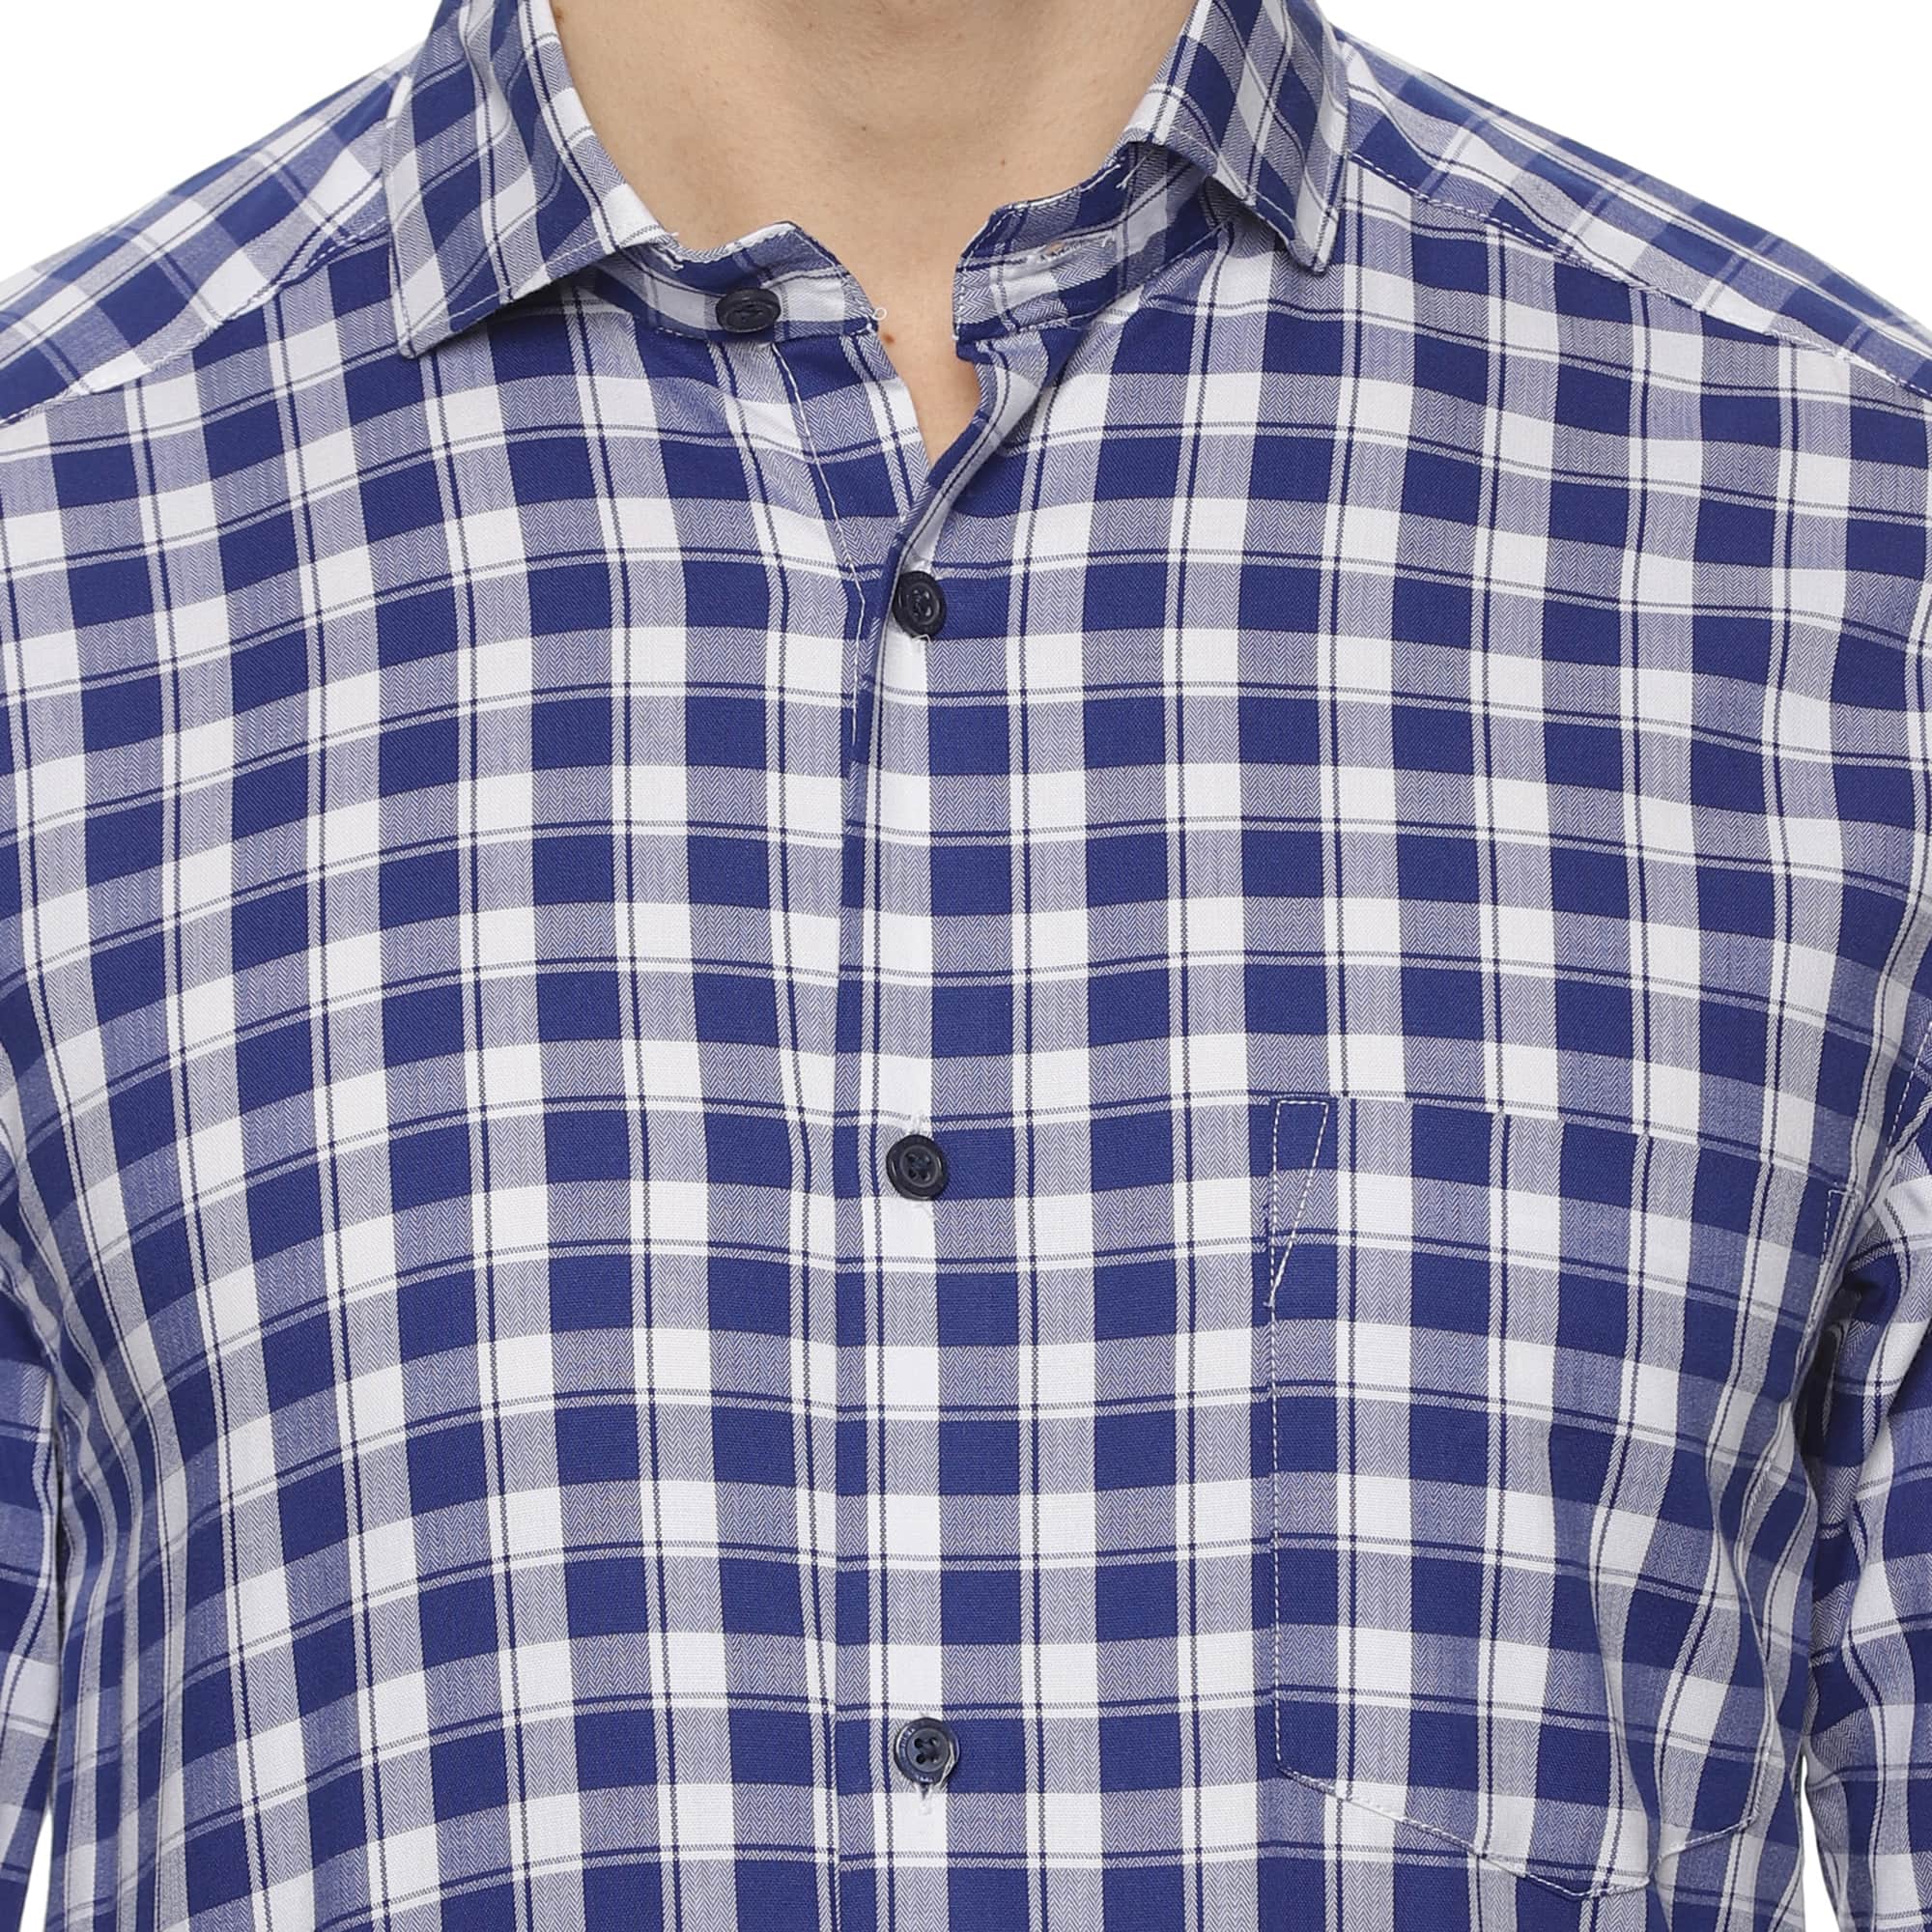 Rebel Cotton Check Shirt In White & Blue - The Formal Club